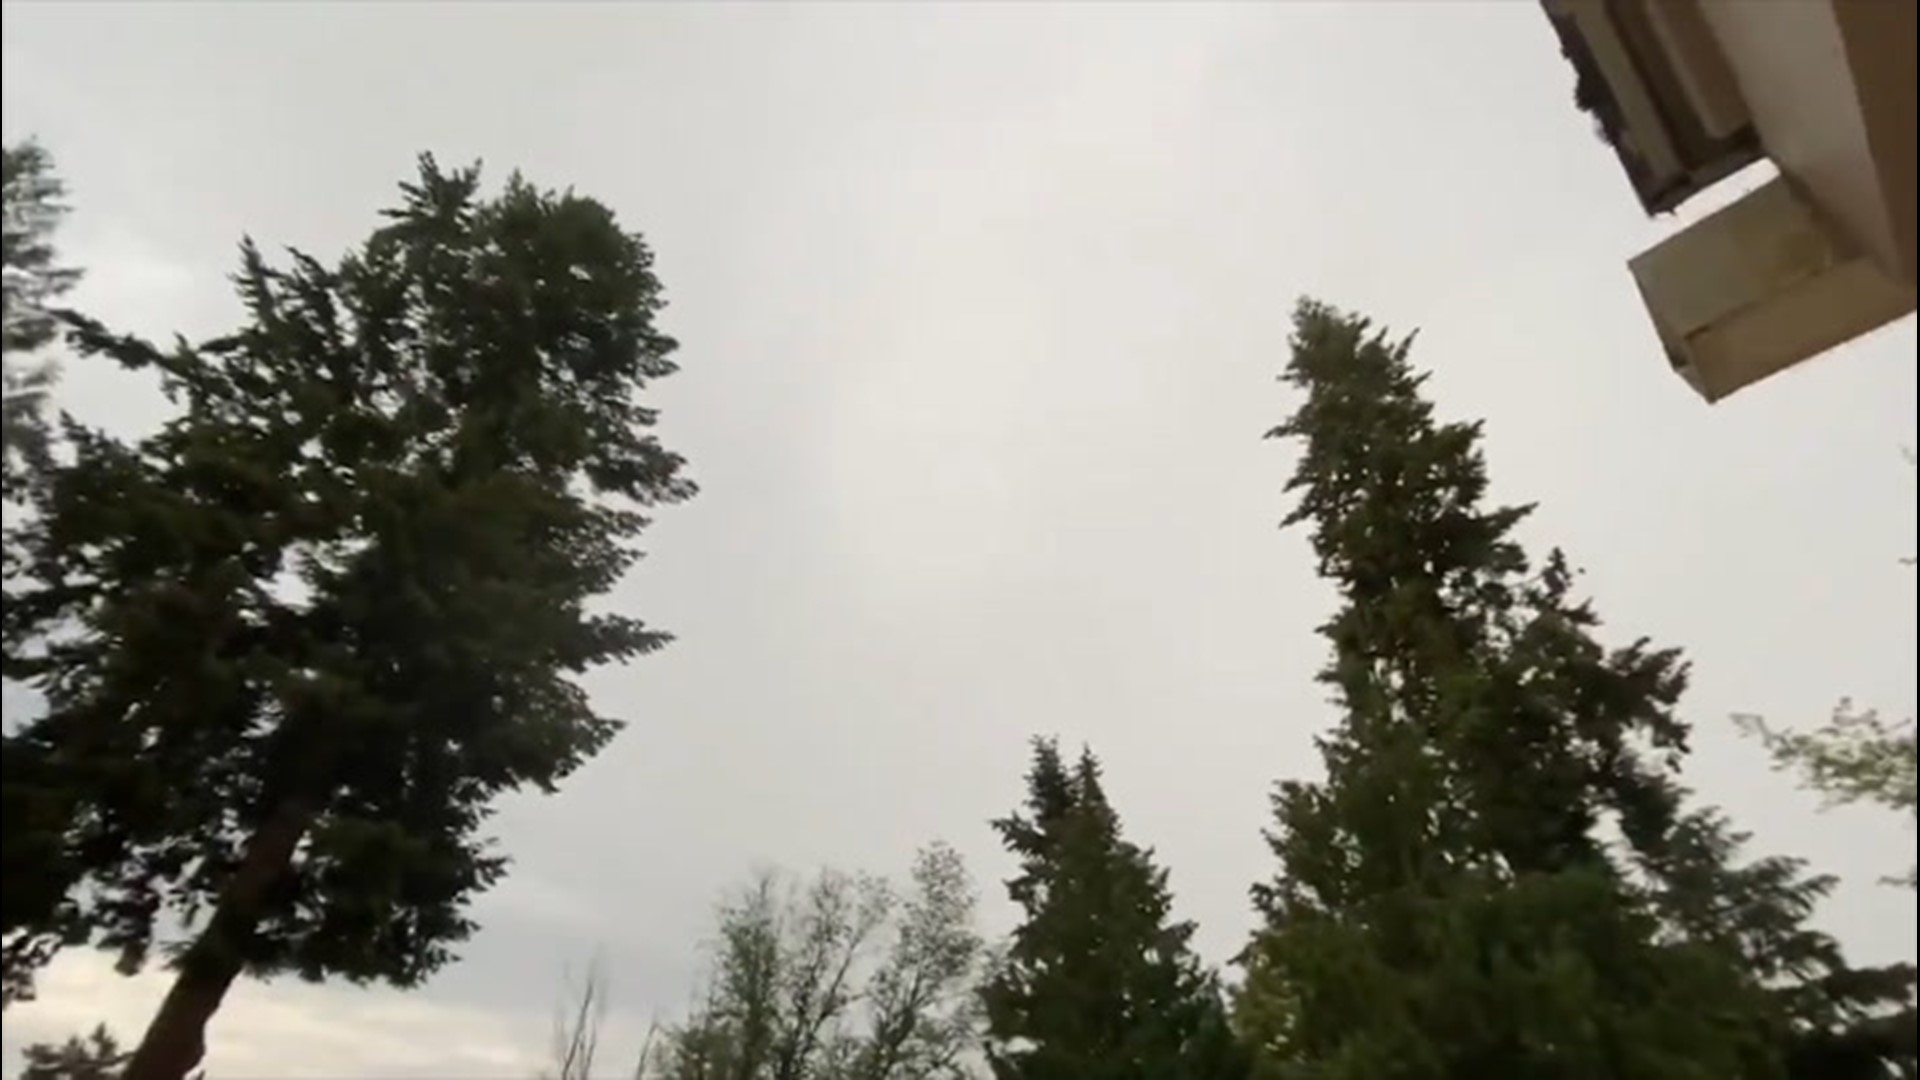 Early Saturday morning, May 28, residents of Bremerton, Washington, found themselves plagued by lightning, thunder and a downpour of rain.